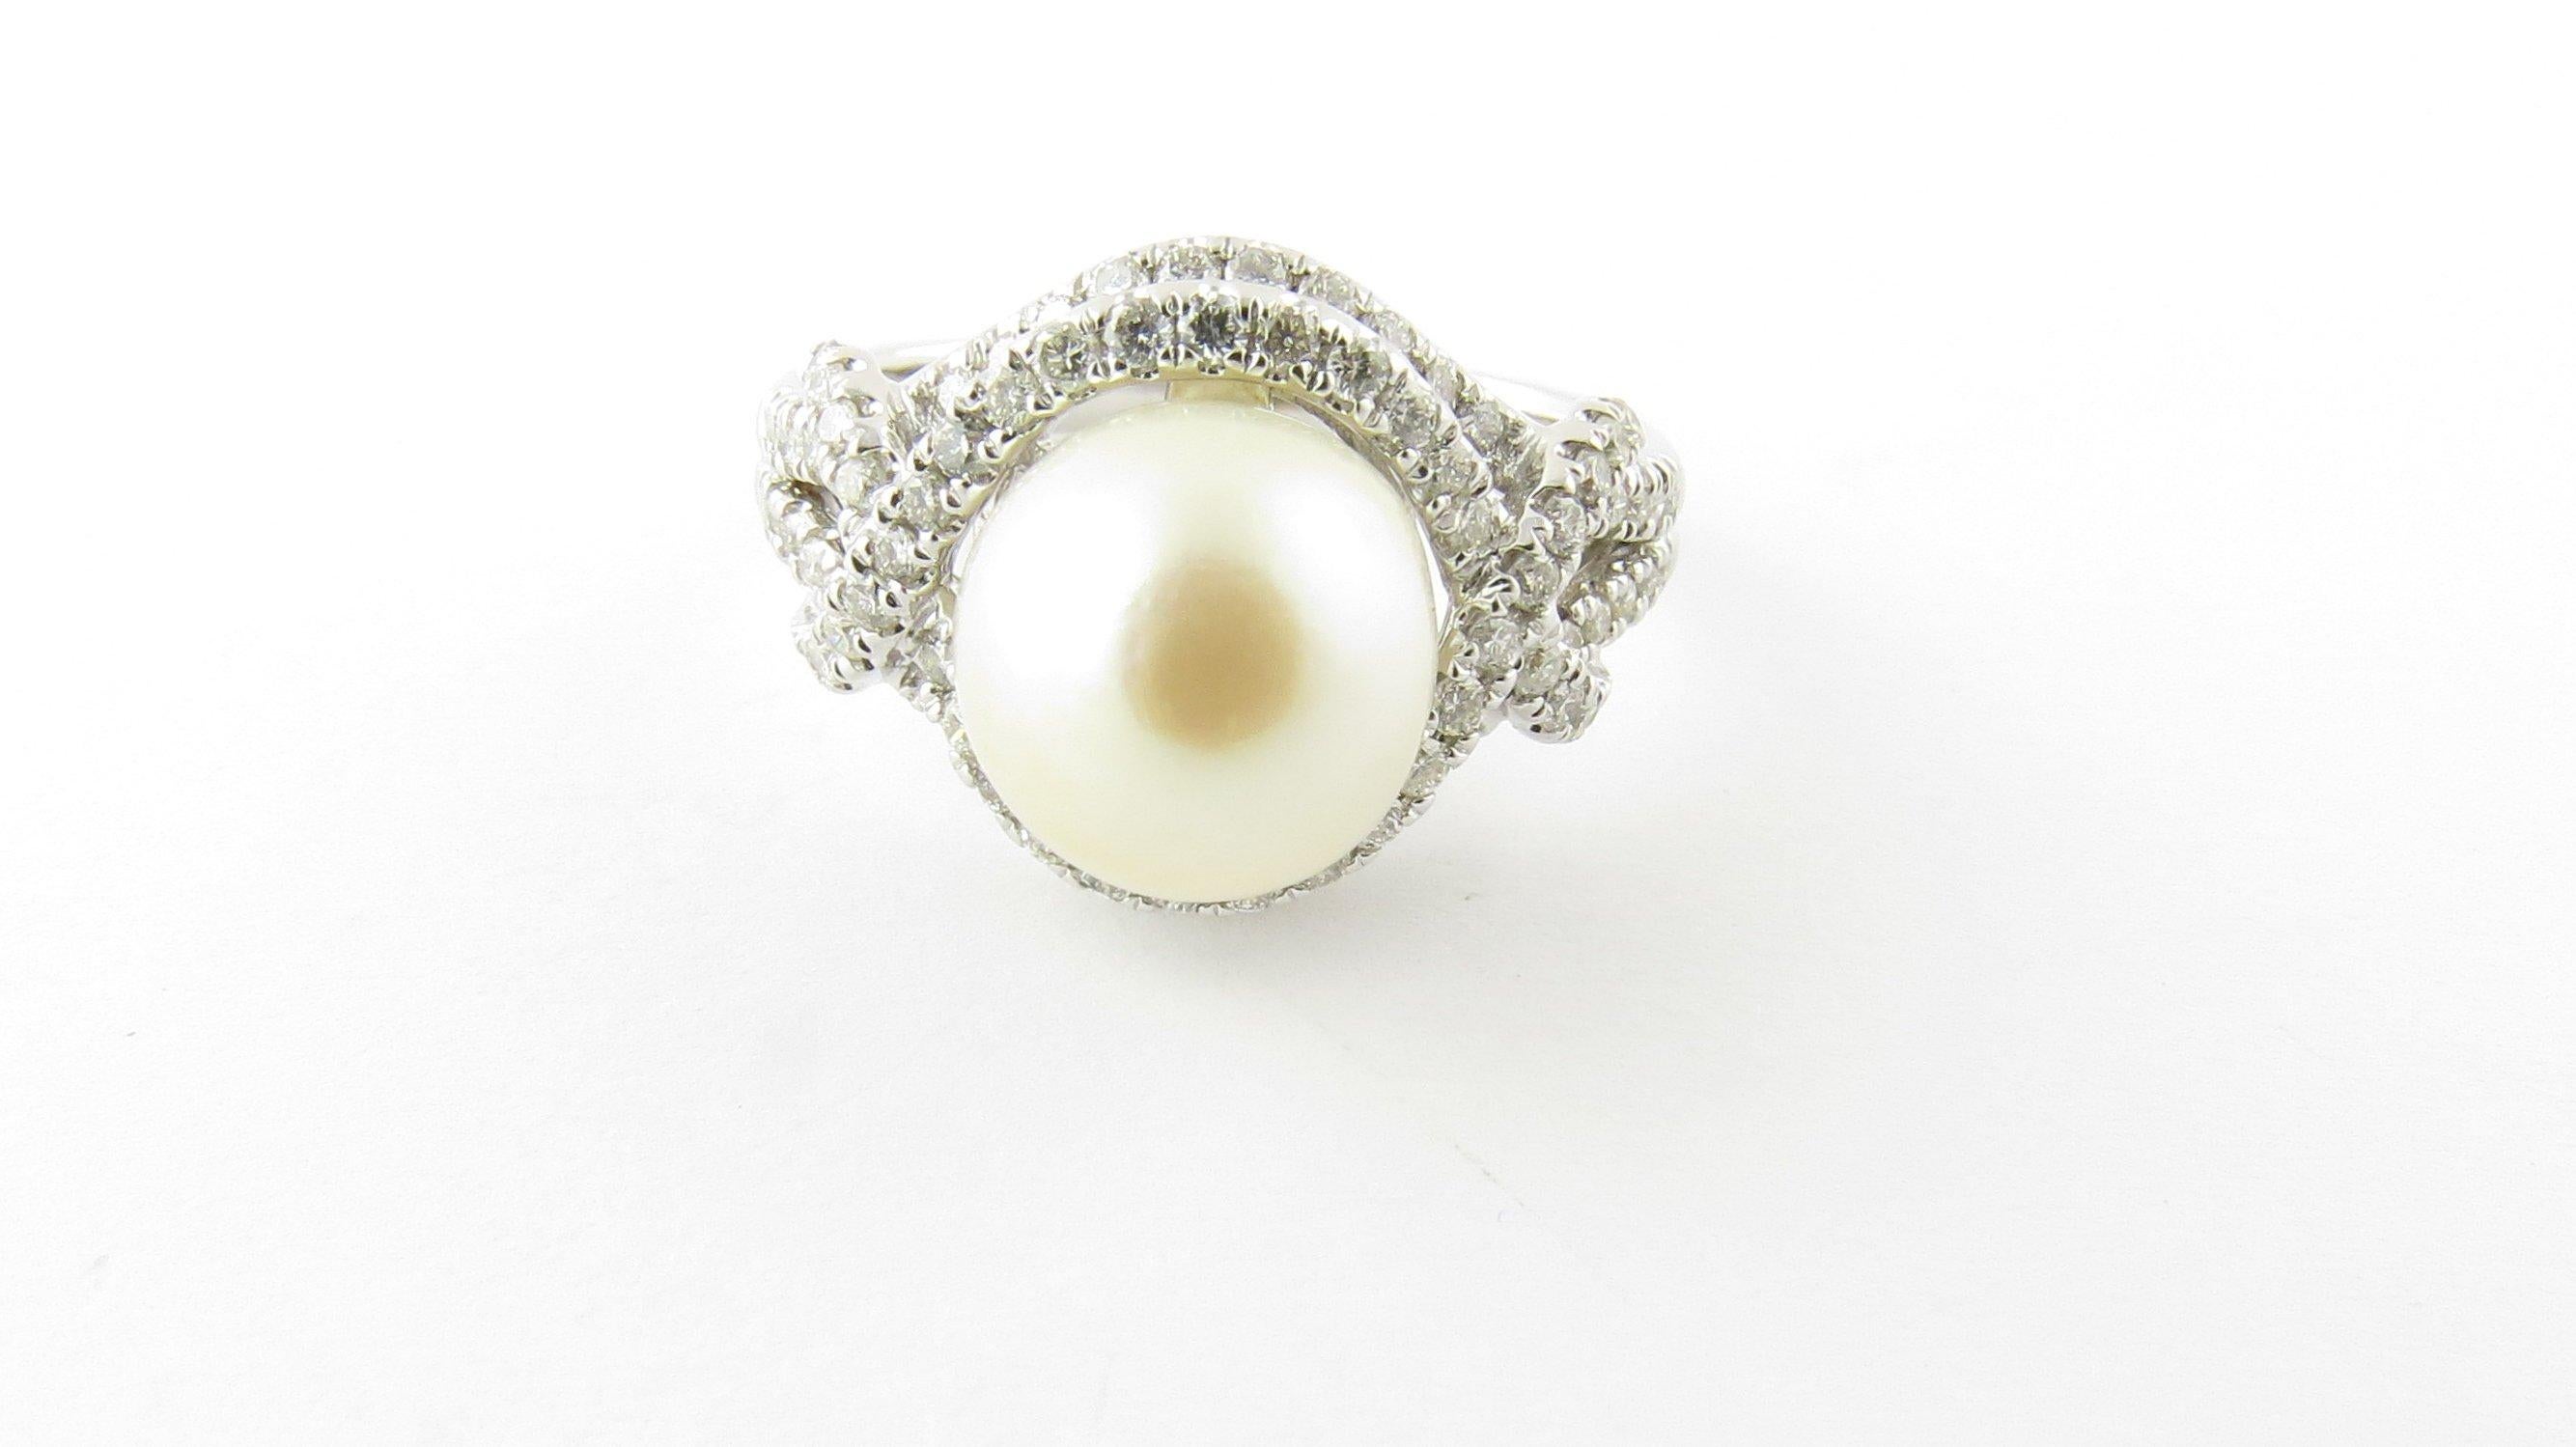 Vintage 14 Karat White Gold Pearl and Diamond Ring Size 6.75- This stunning ring features one cultured pearl (8.5 mm) surrounded by 78 round brilliant cut diamonds set in classic 14K white gold. Shank measures 2 mm. Approximate total diamond weight: